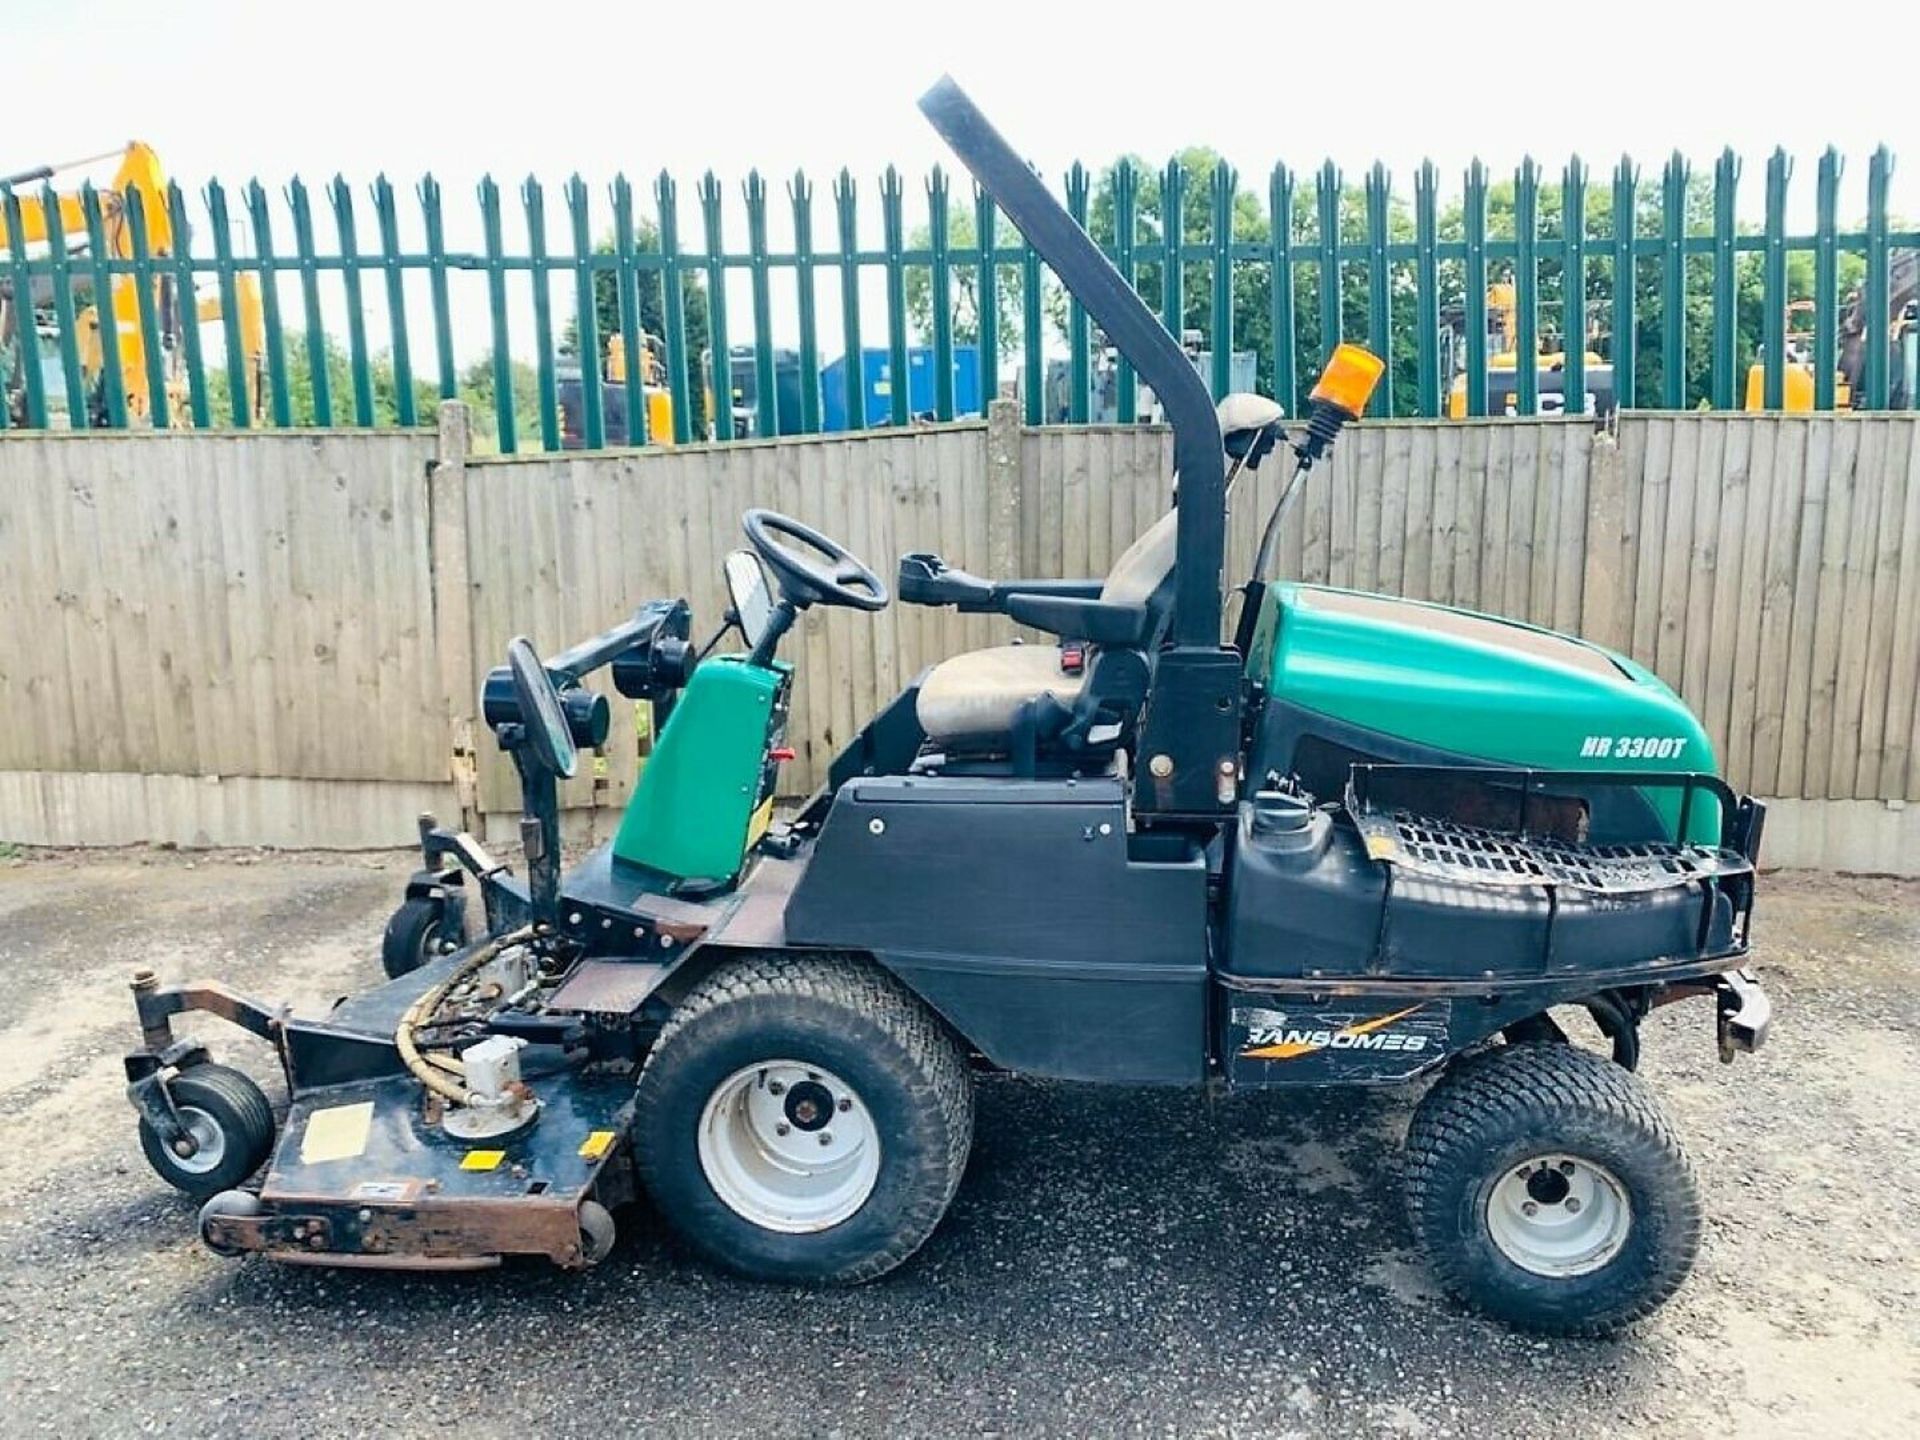 Ransomes HR3300T Rotary Mower (2009)